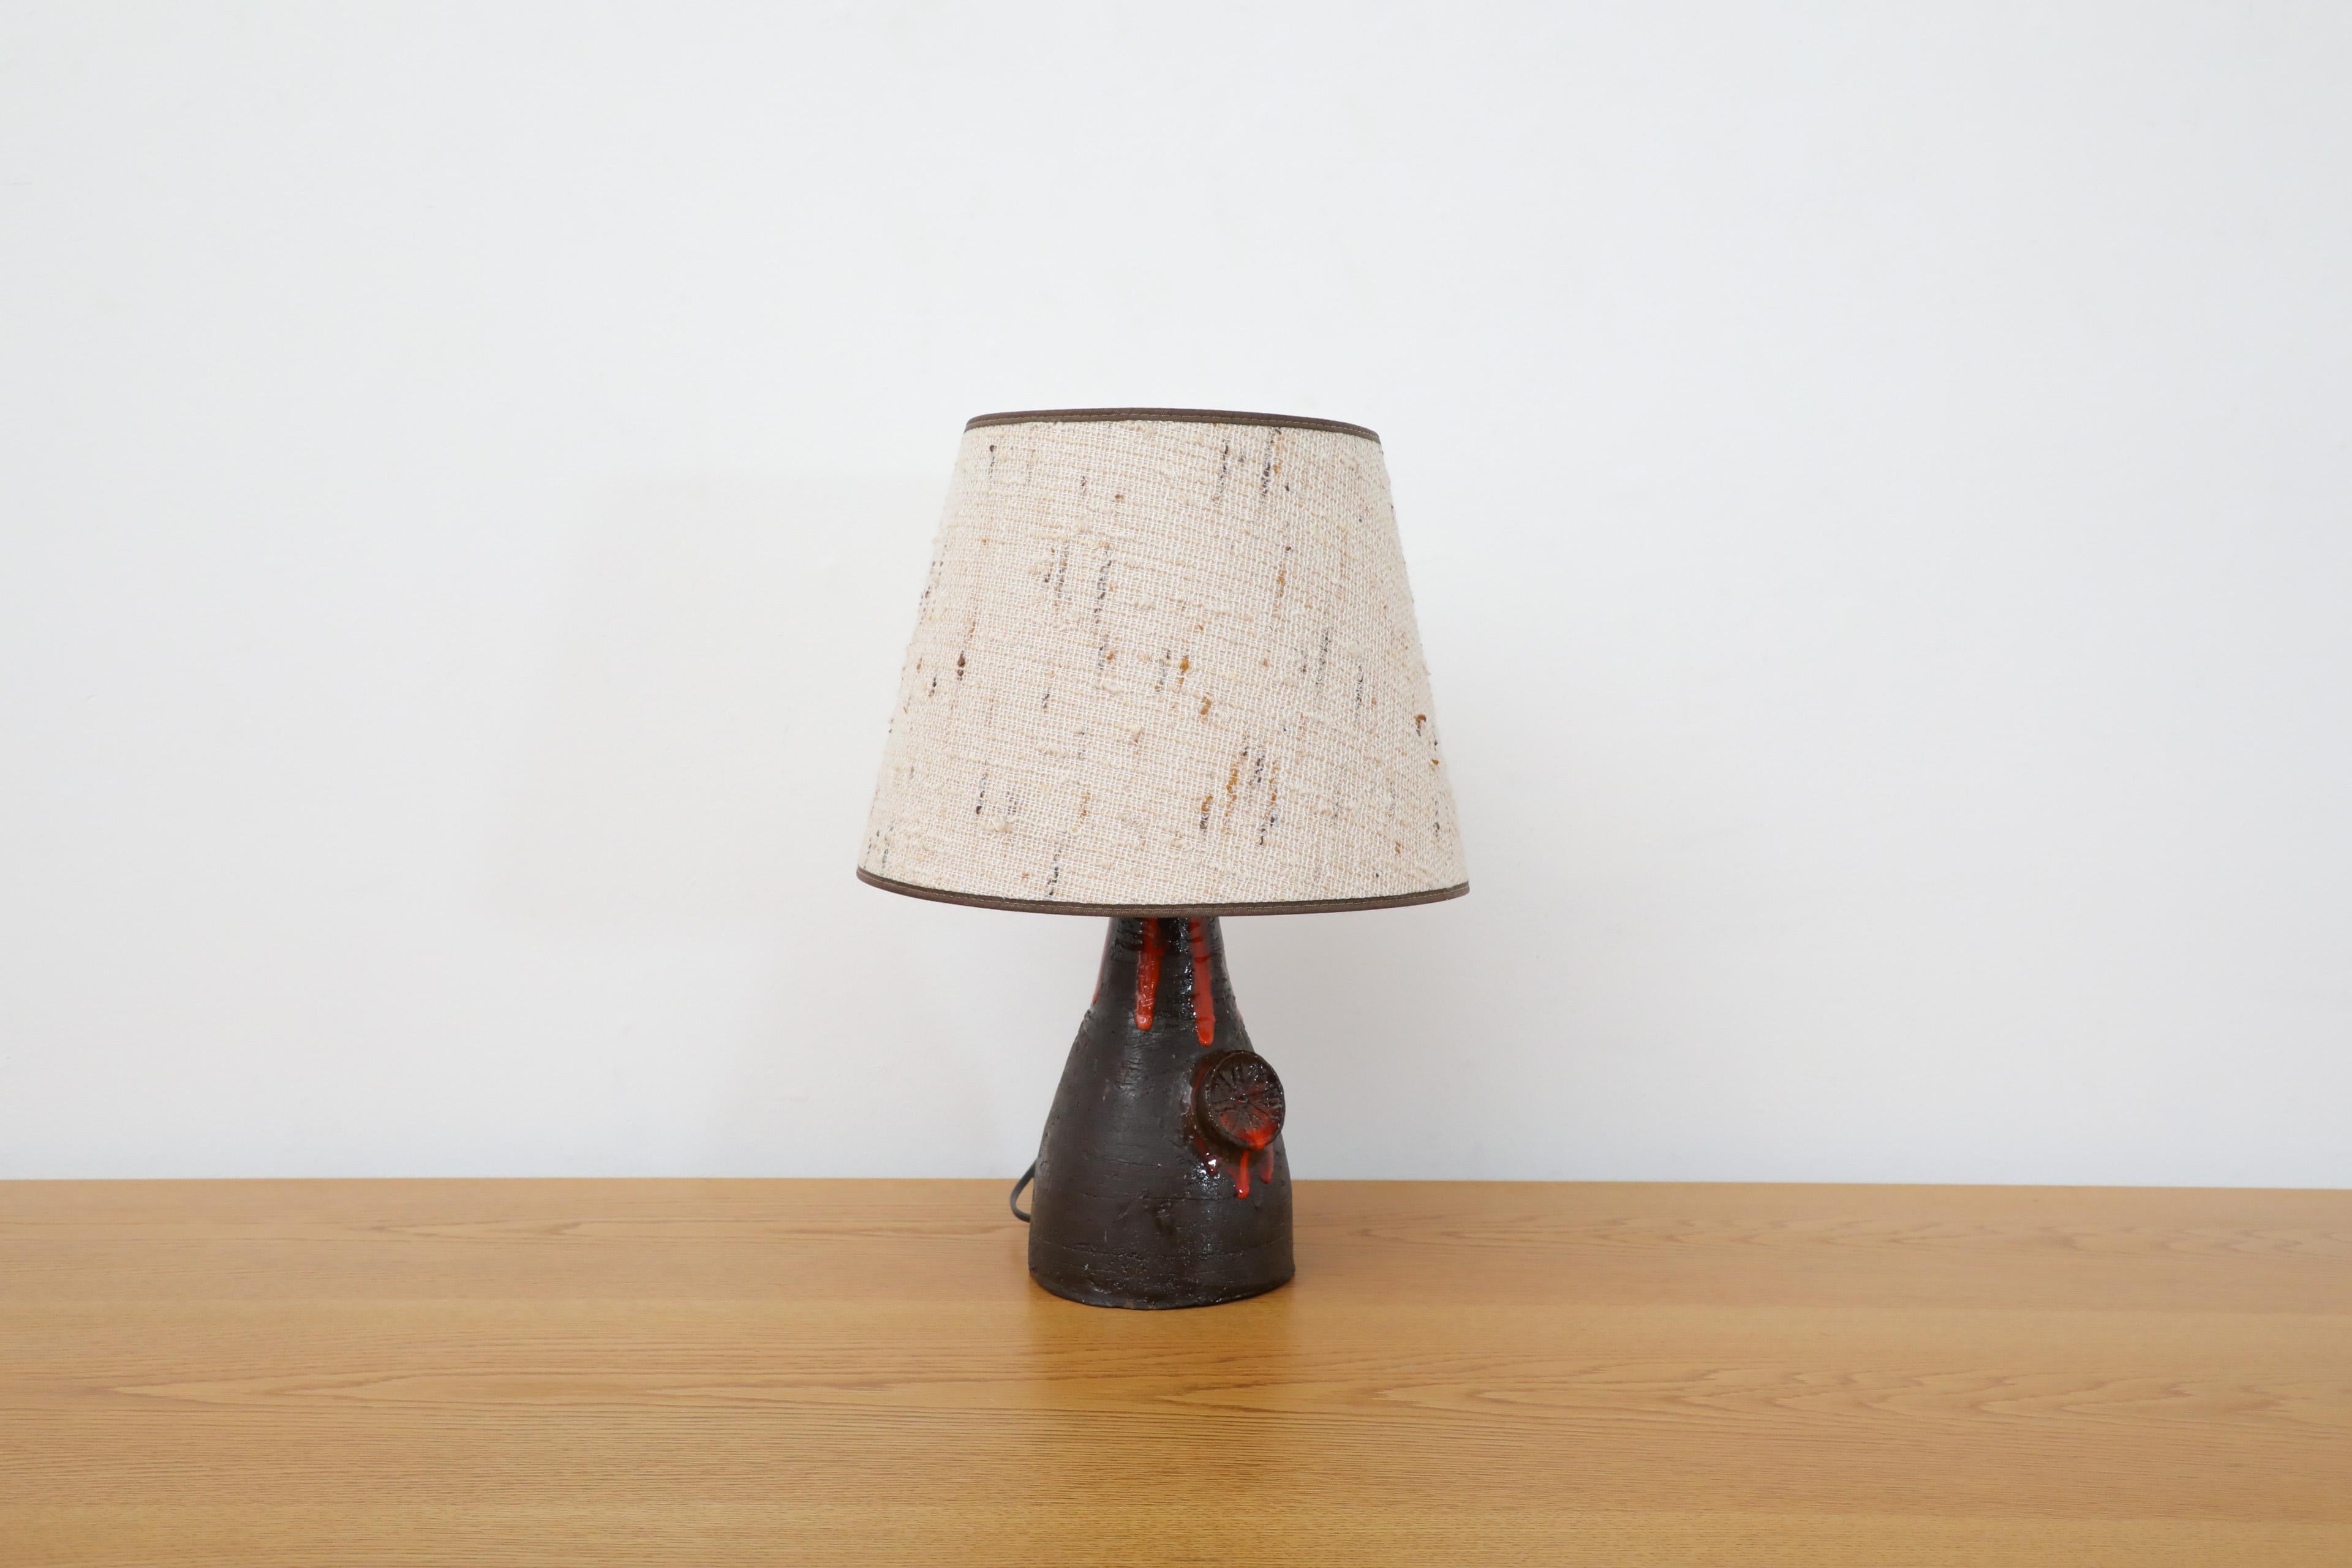 Dutch Mid-Century Black Ceramic Volcanic Table Lamp w/ Red Dripping Effect Glaze In Good Condition For Sale In Los Angeles, CA